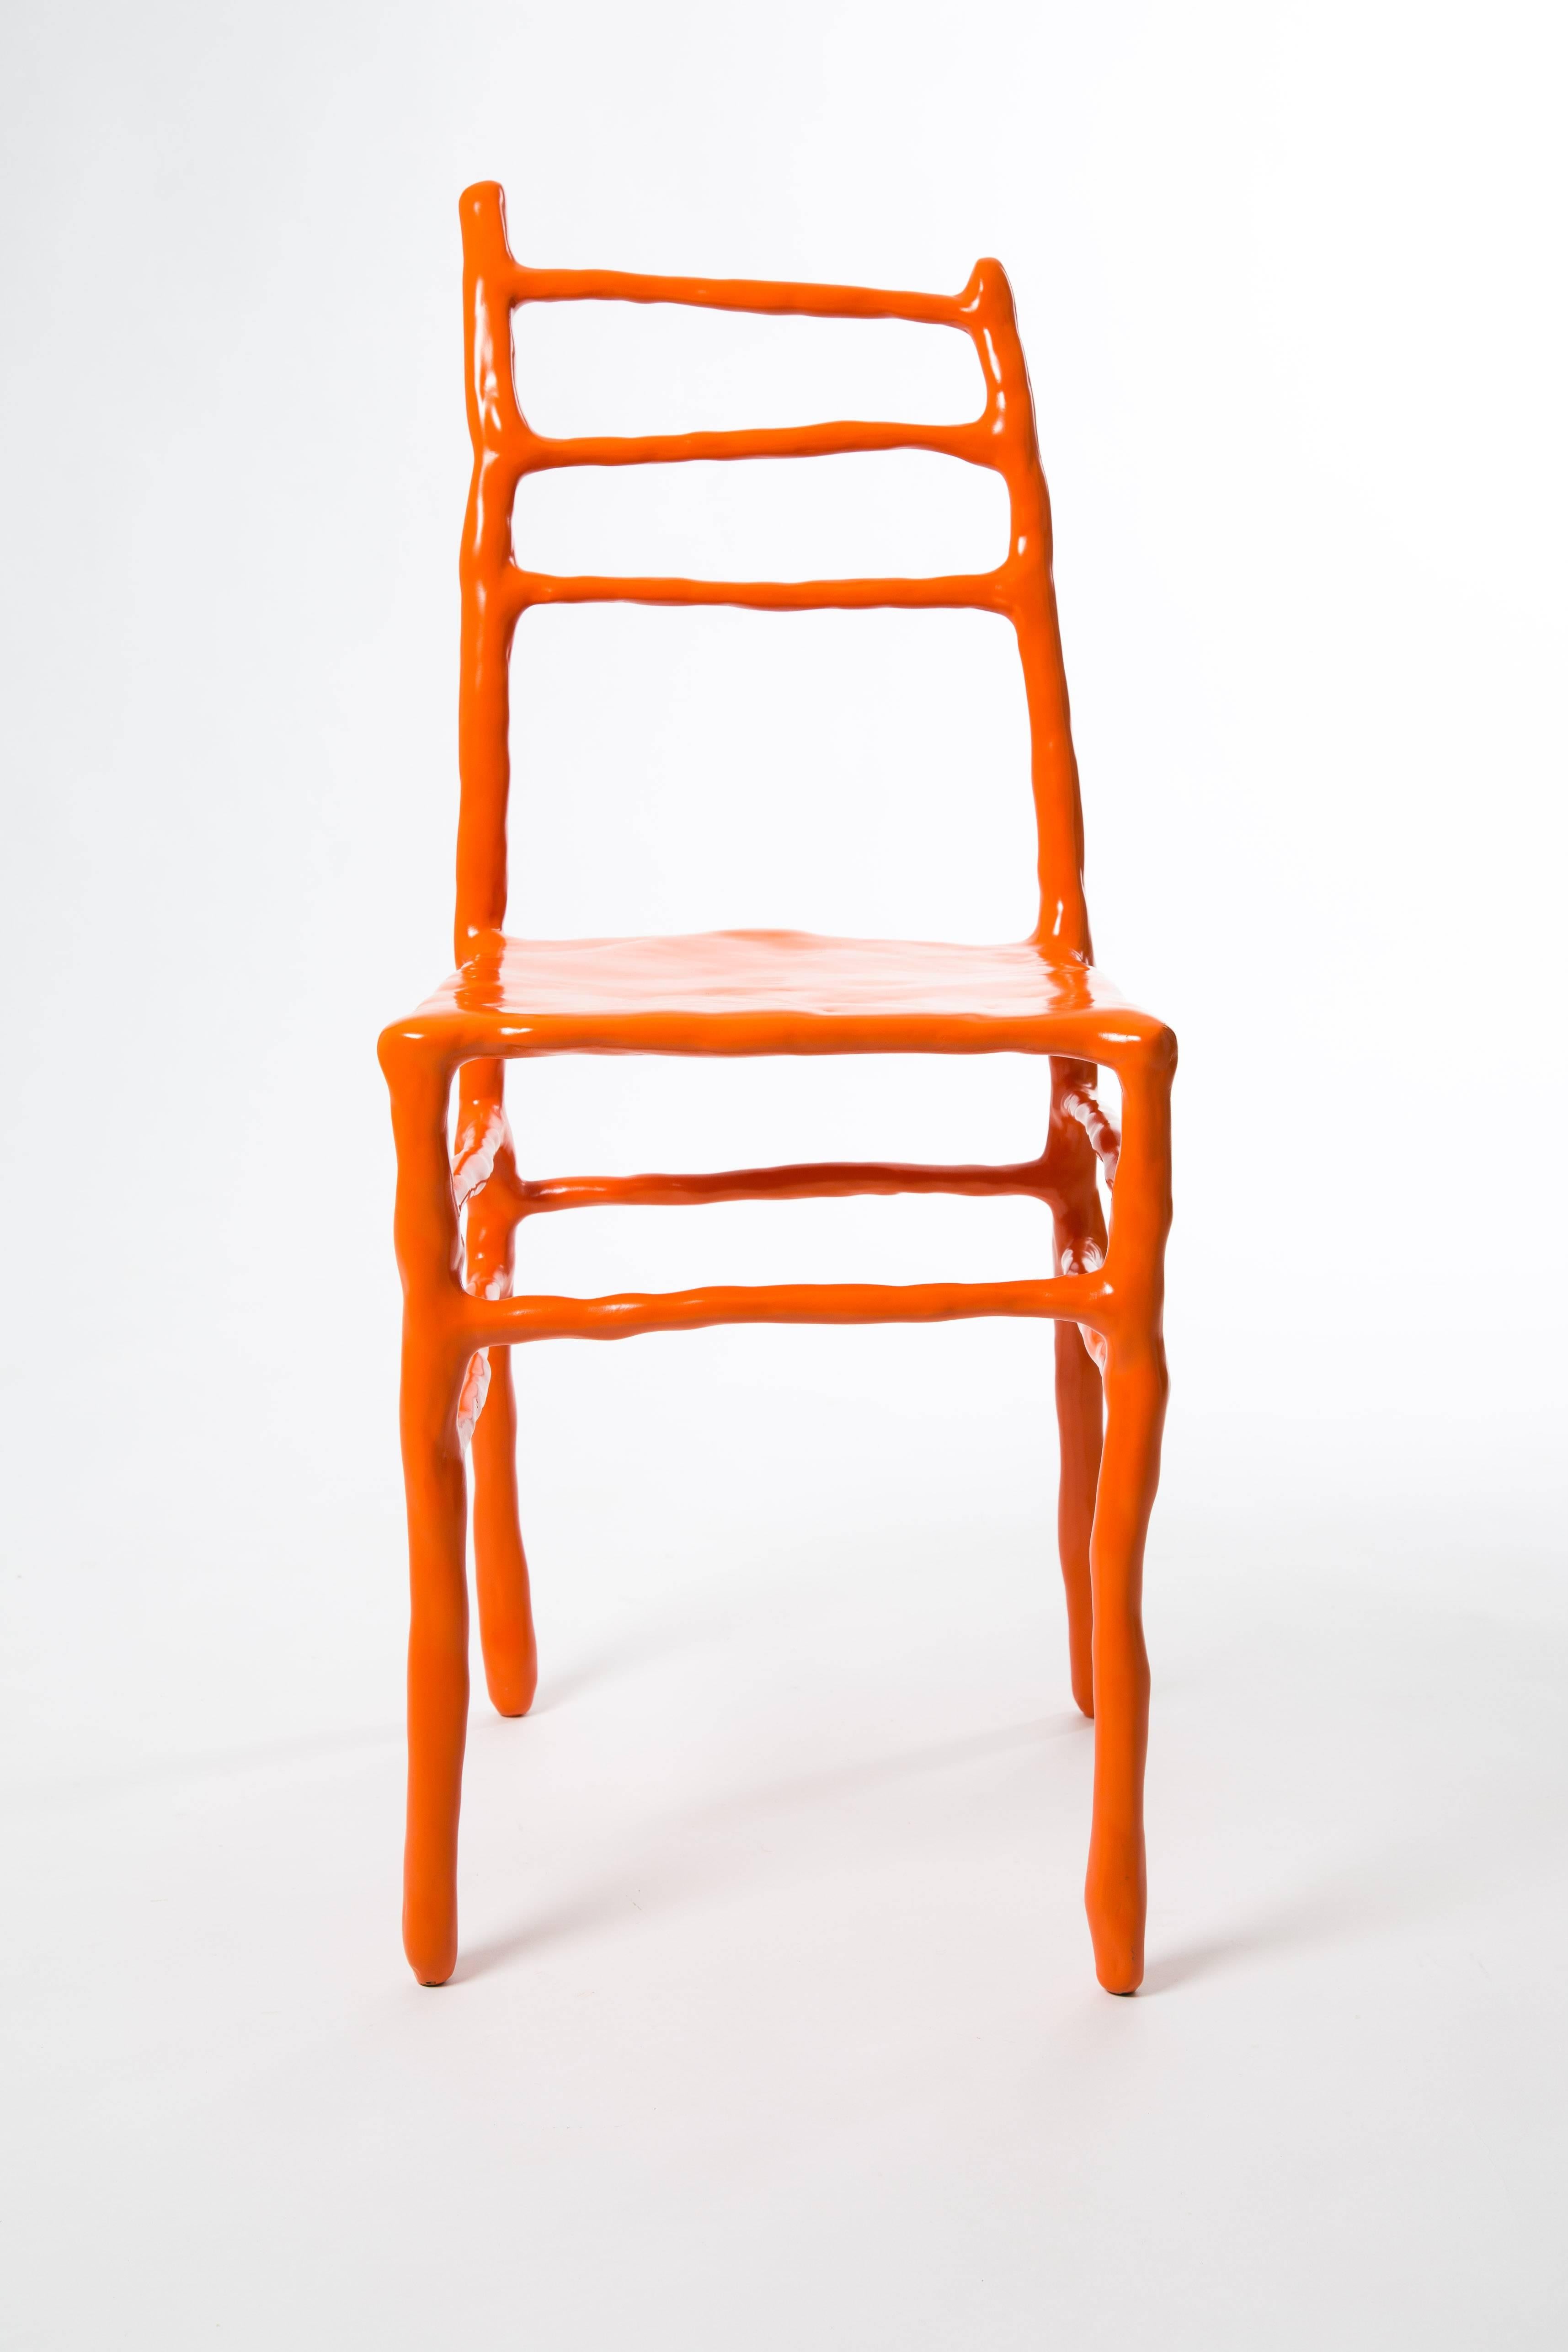 Maarten Baas made this clay chair at the art fair Art Basel in 2007. This chair is one of five orange clay chairs numbered 2/5. He is now one of the most famous Dutch designers. Signed by Maarten Baas with marker. Naam BAAS in metal and year as a